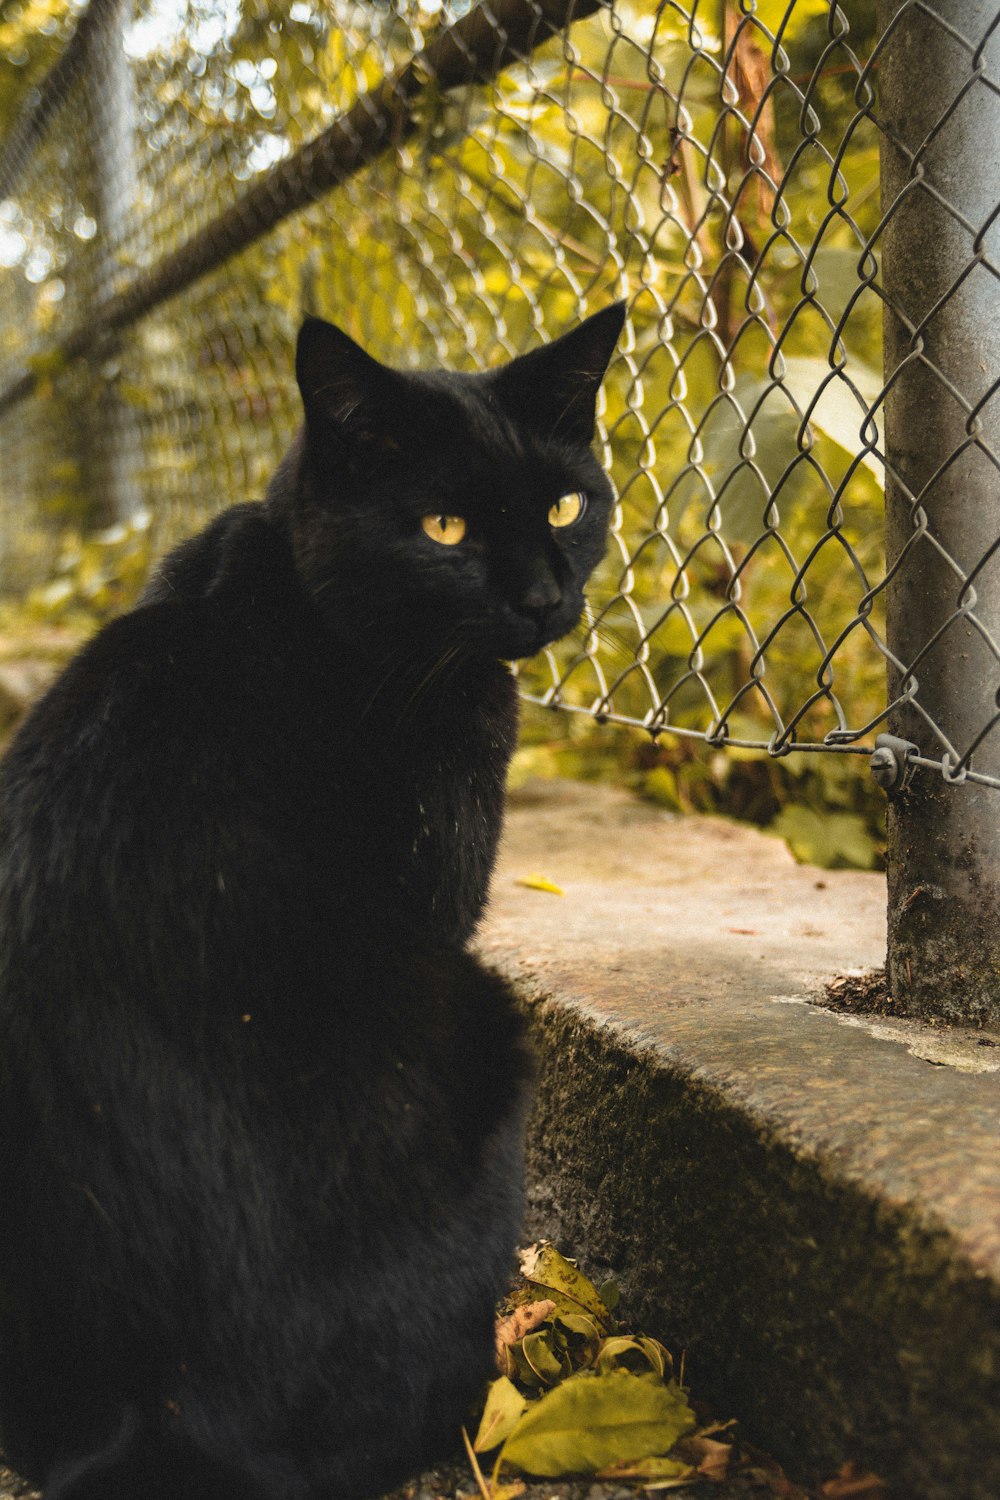 a black cat sitting on the ground next to a fence